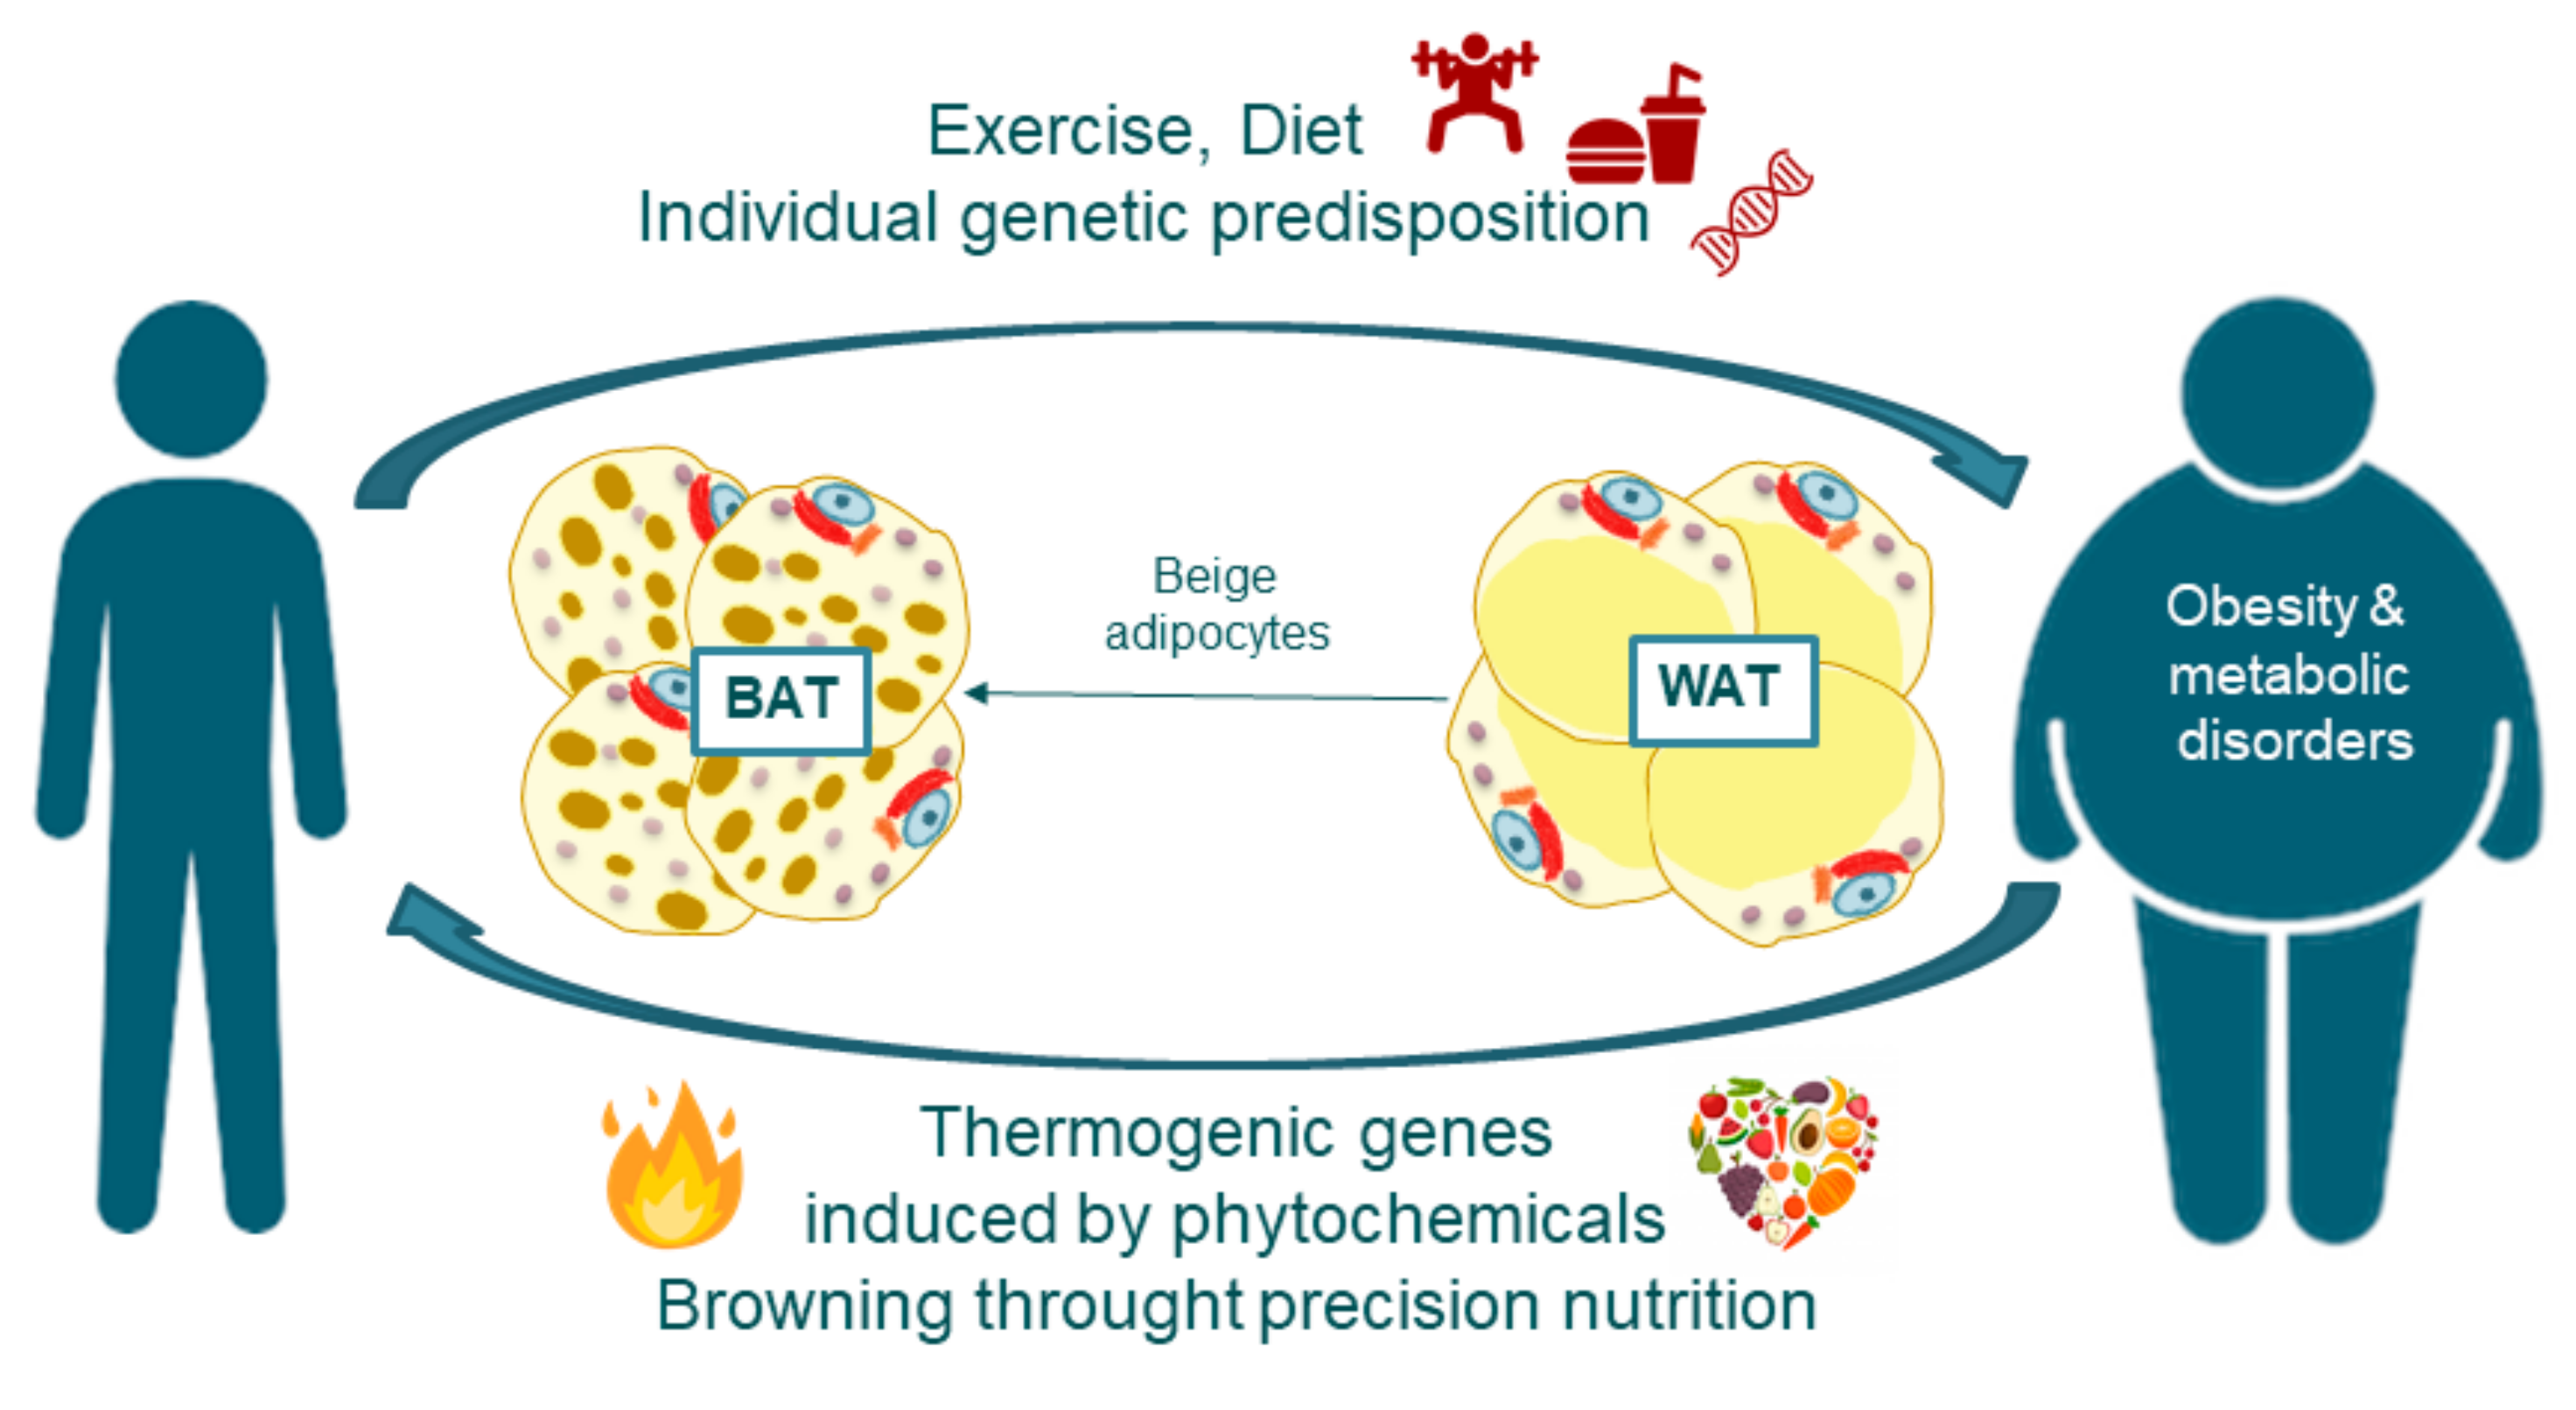 Thermogenesis and metabolic disorders